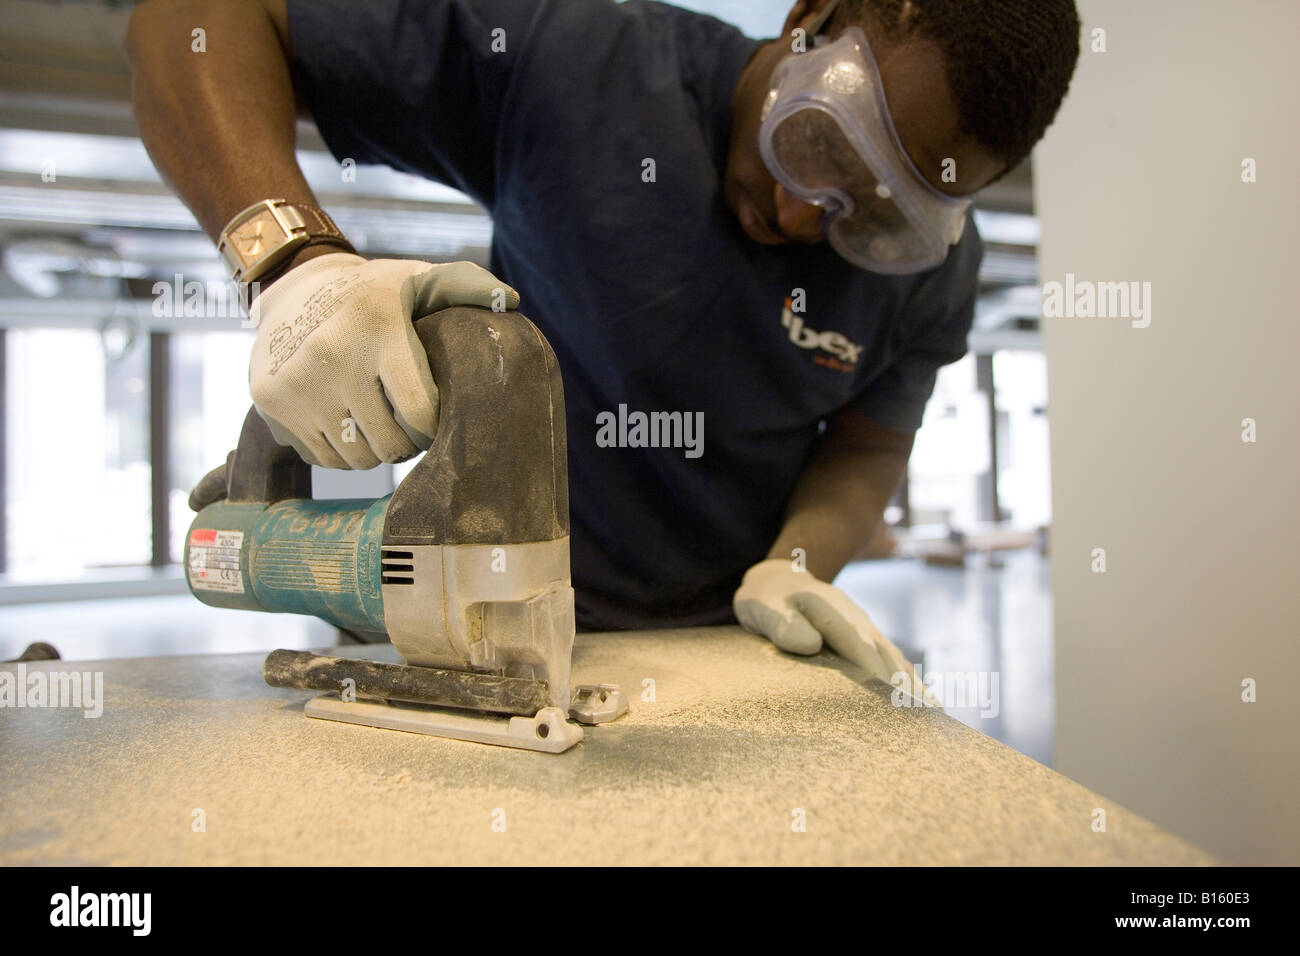 A Workman Cuts A Round Cable Routing Hole In A Desk Stock Photo